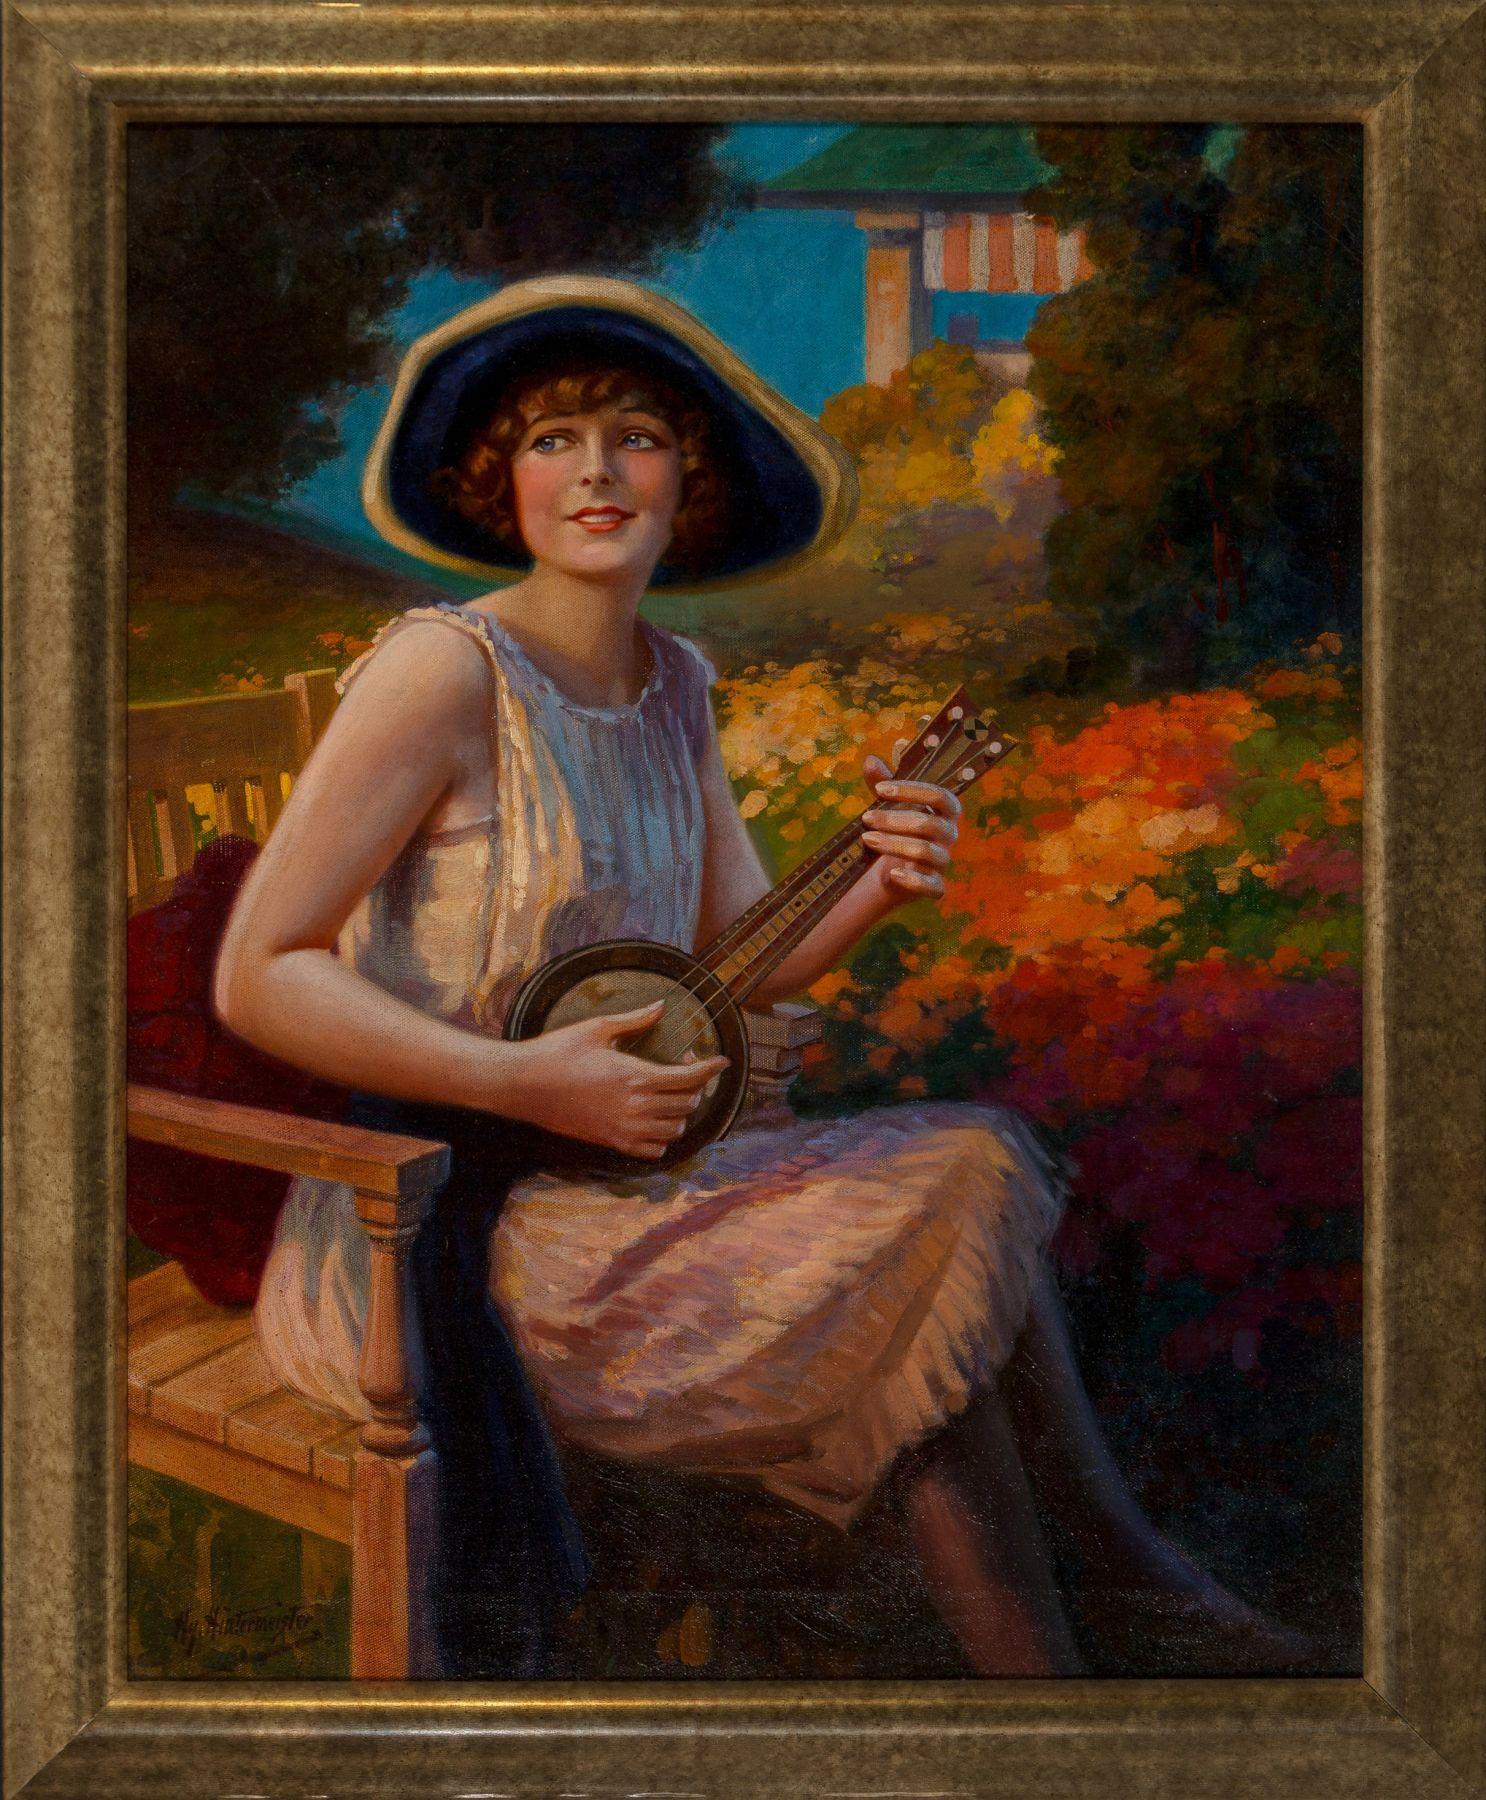 Woman With Instrument - Painting by Henry Hintermeister